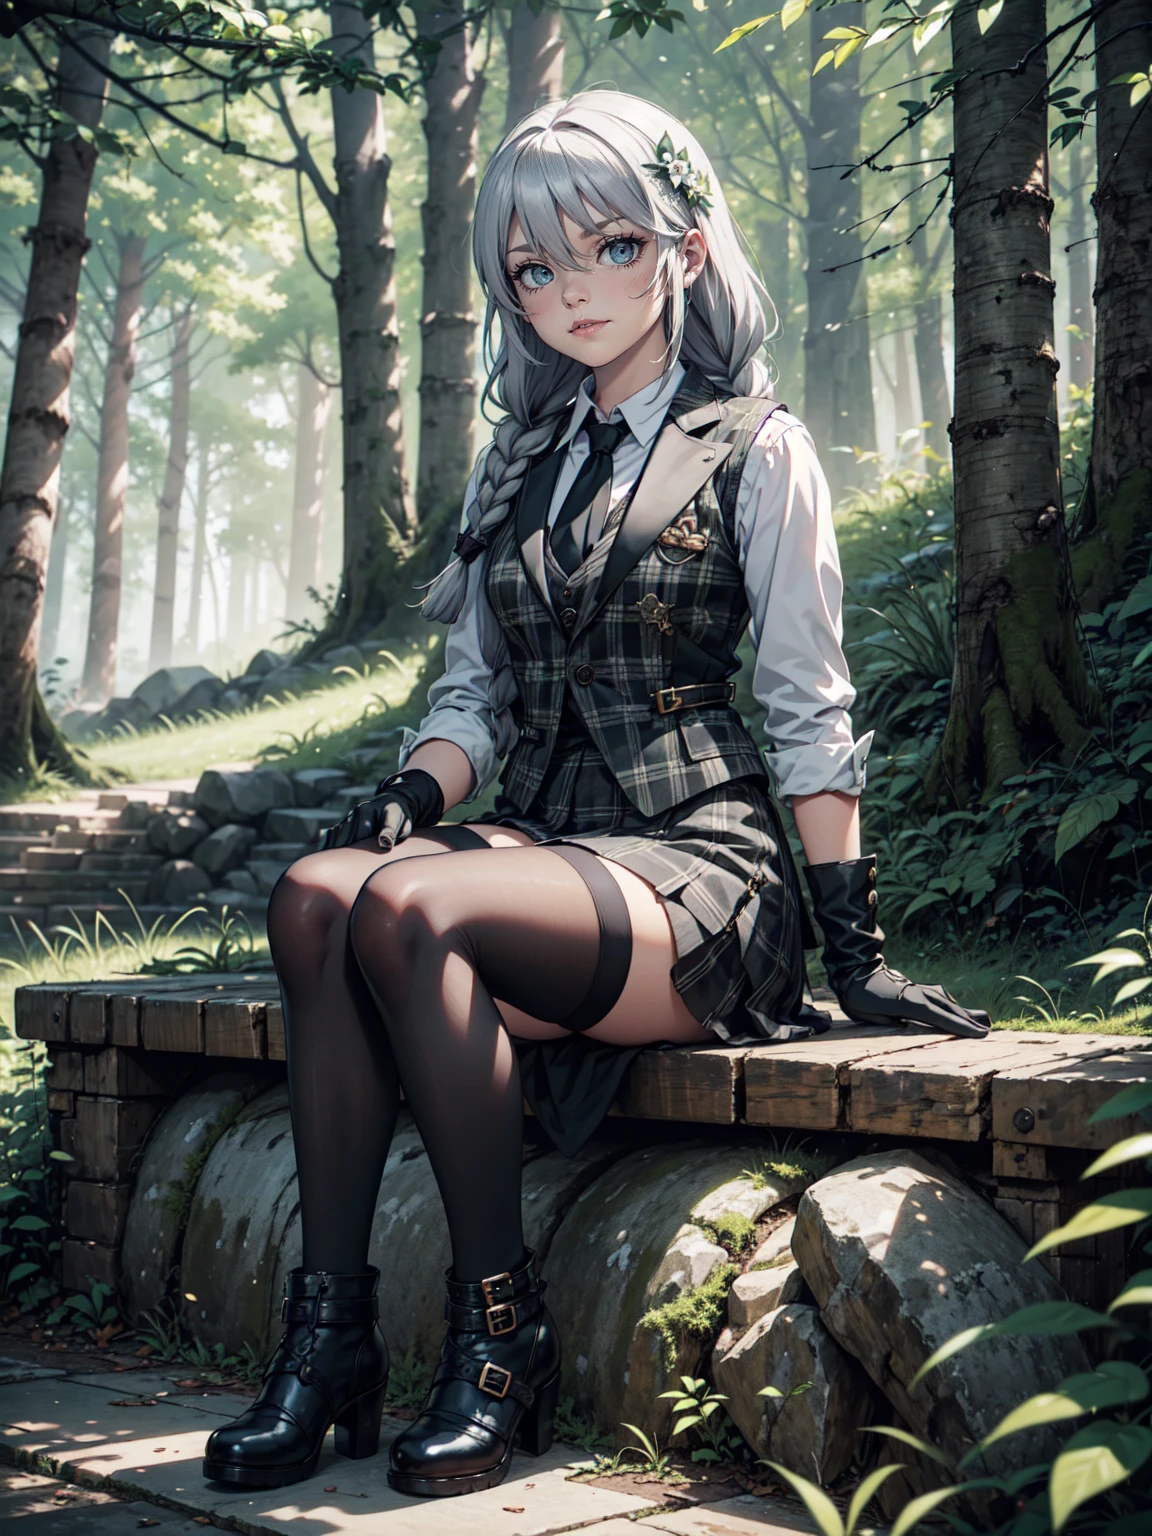 Ultra High Definition, Ultra High Quality, Hyper Definition, Hyper Quality, Hyper Detailed, Extremely Detailed, Perfectly Detailed, 8k, 1 Anime Female, Long Silver Hair with Small Braids,  Black Luxury Vest, Grey Plaid Skirt, Dark Boots On Heels, Black Tights, Gloves, Solid Green Eyes, Smirking  Expressio, Sitting, White Flower Barrette, Dressed in school , Forest Panoramic Background
